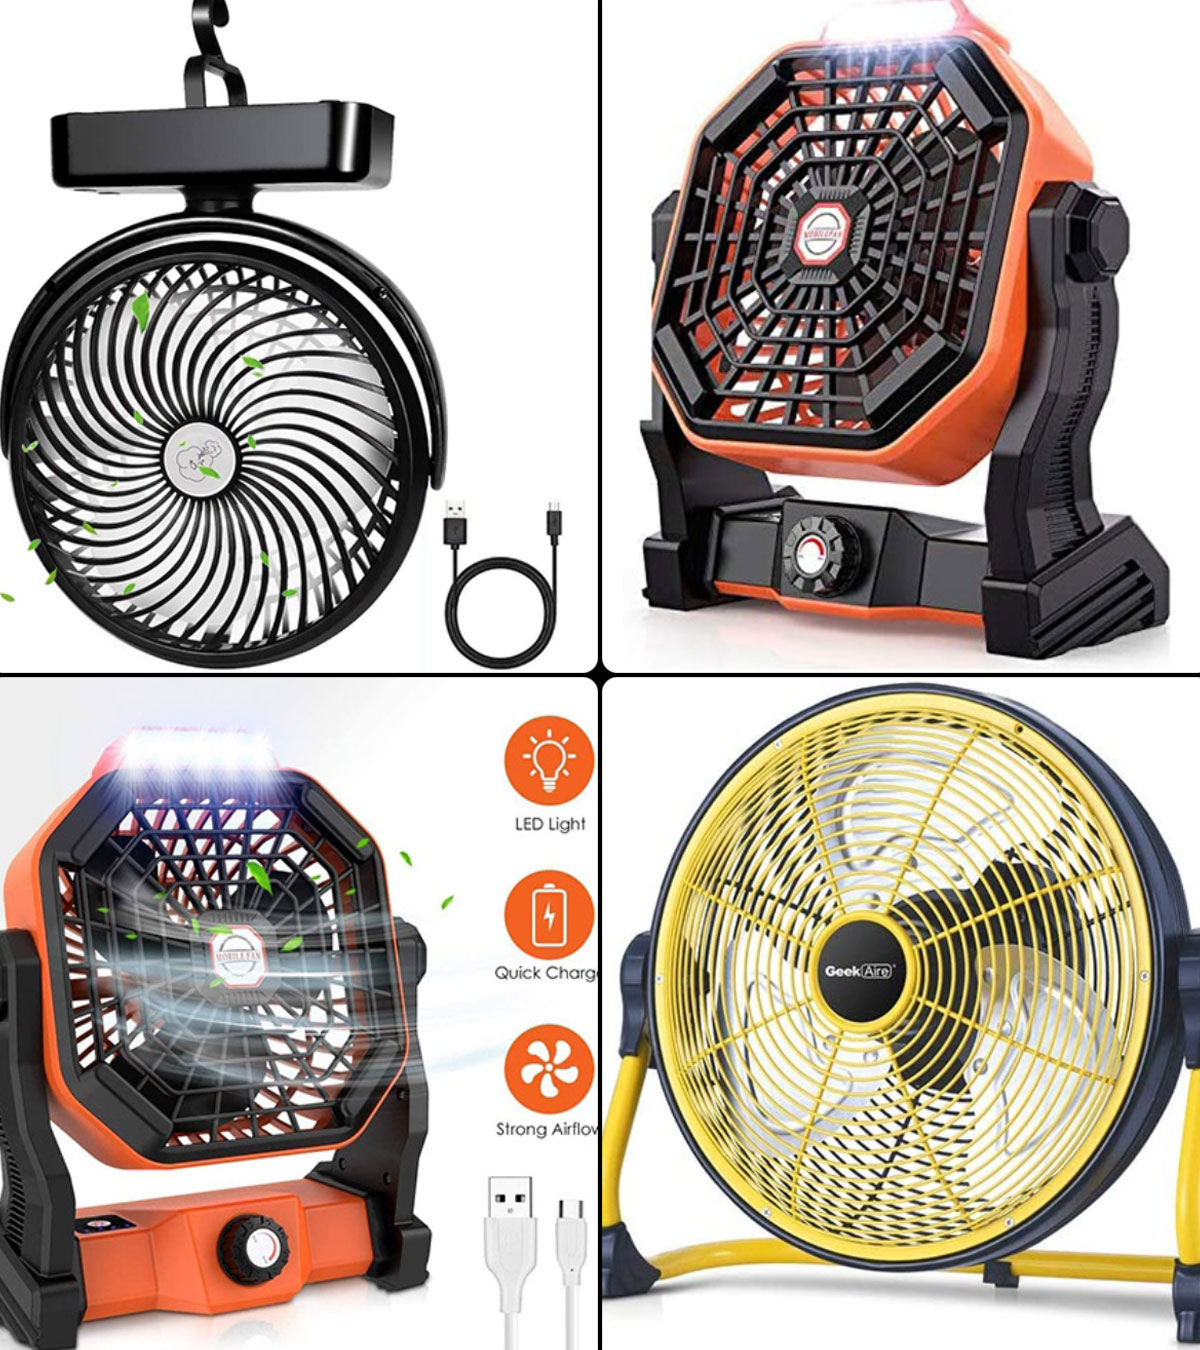 The 9 Best Camping Fans to Help Beat the Summer Heat!